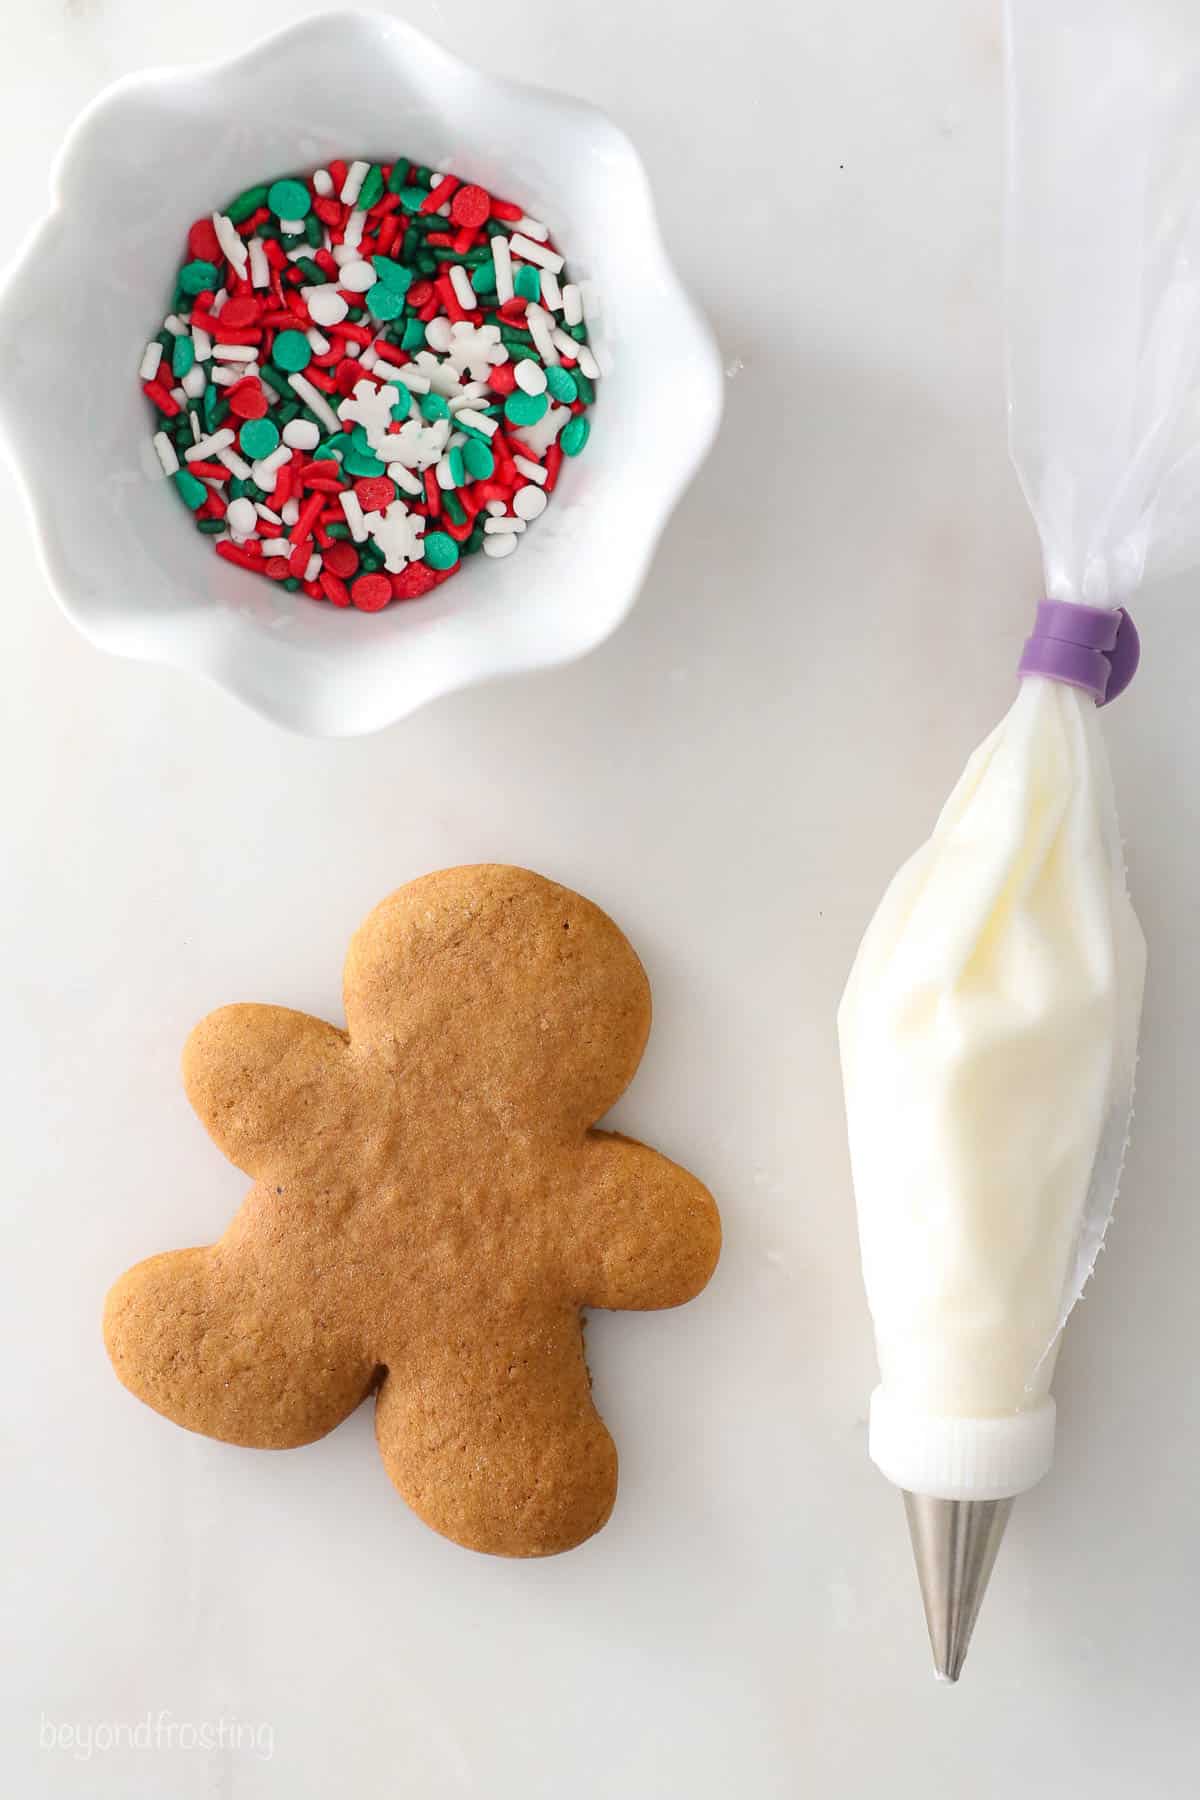 An unfrosted gingerbread cookie beside a bowl of sprinkles and a piping bag filled with icing